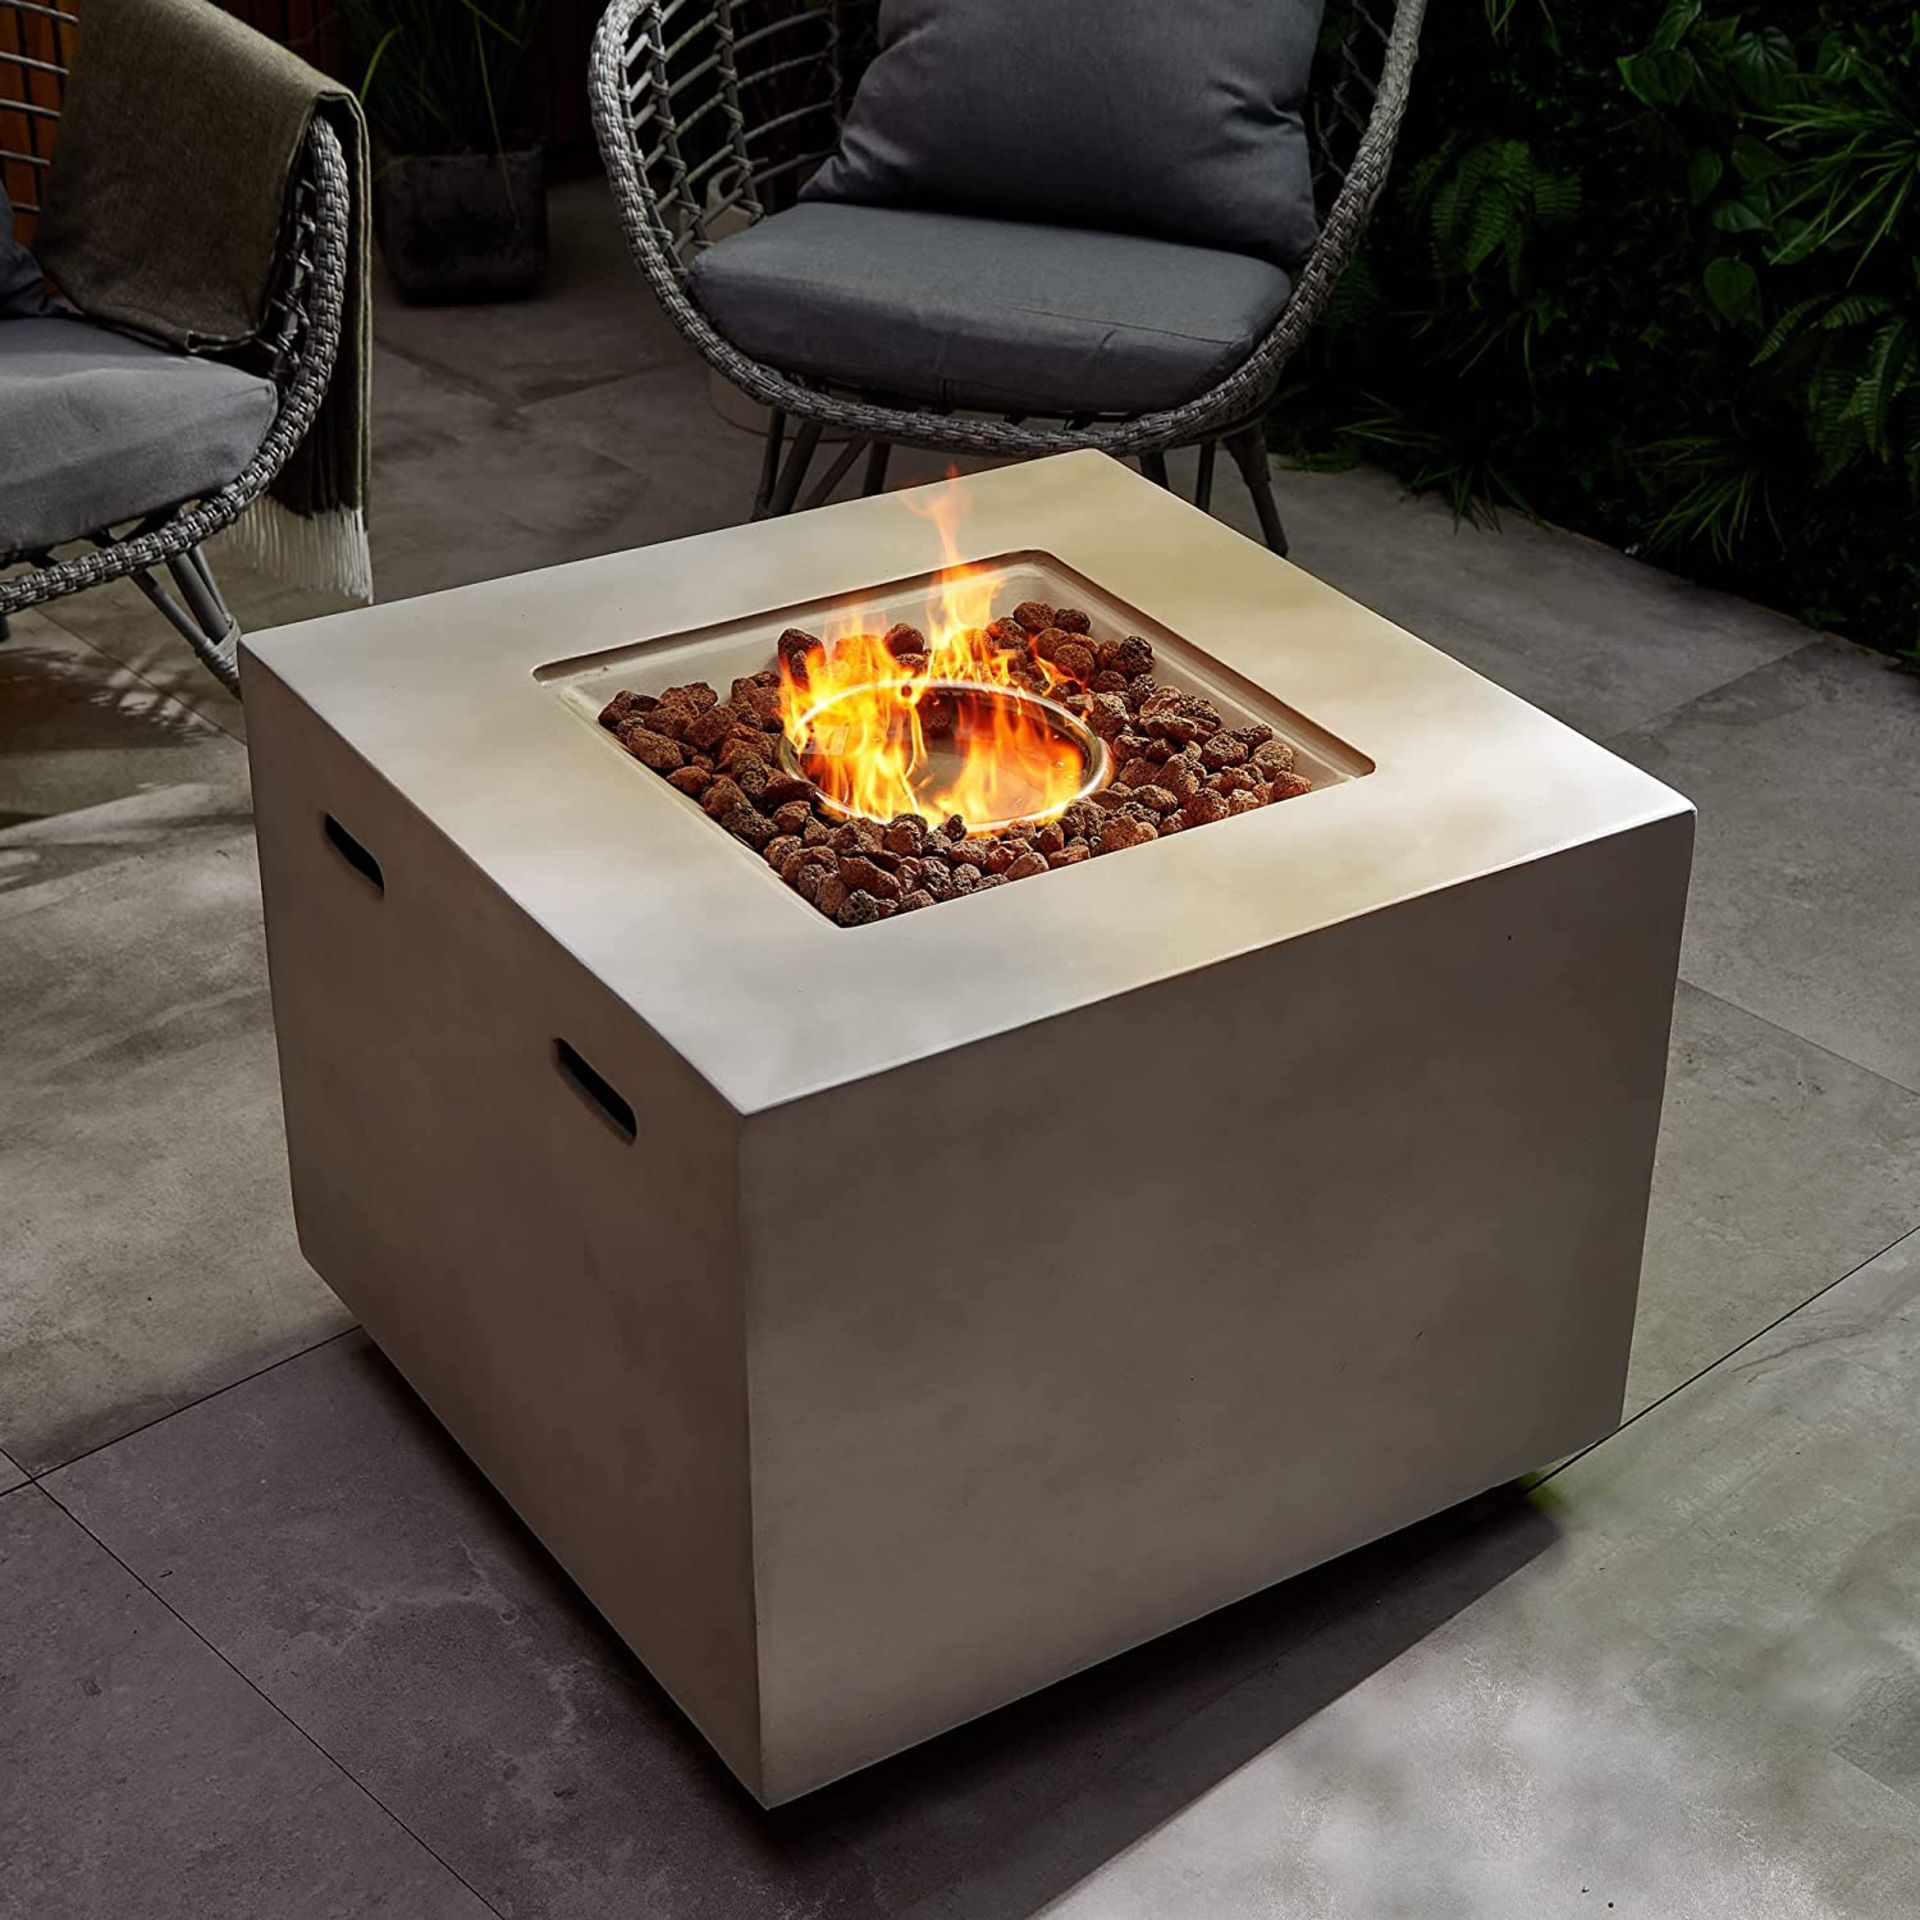 New & Boxed Luxury Square Gas Fire Pit. RRP £699.99. (ROW6REF555) All the flames without the